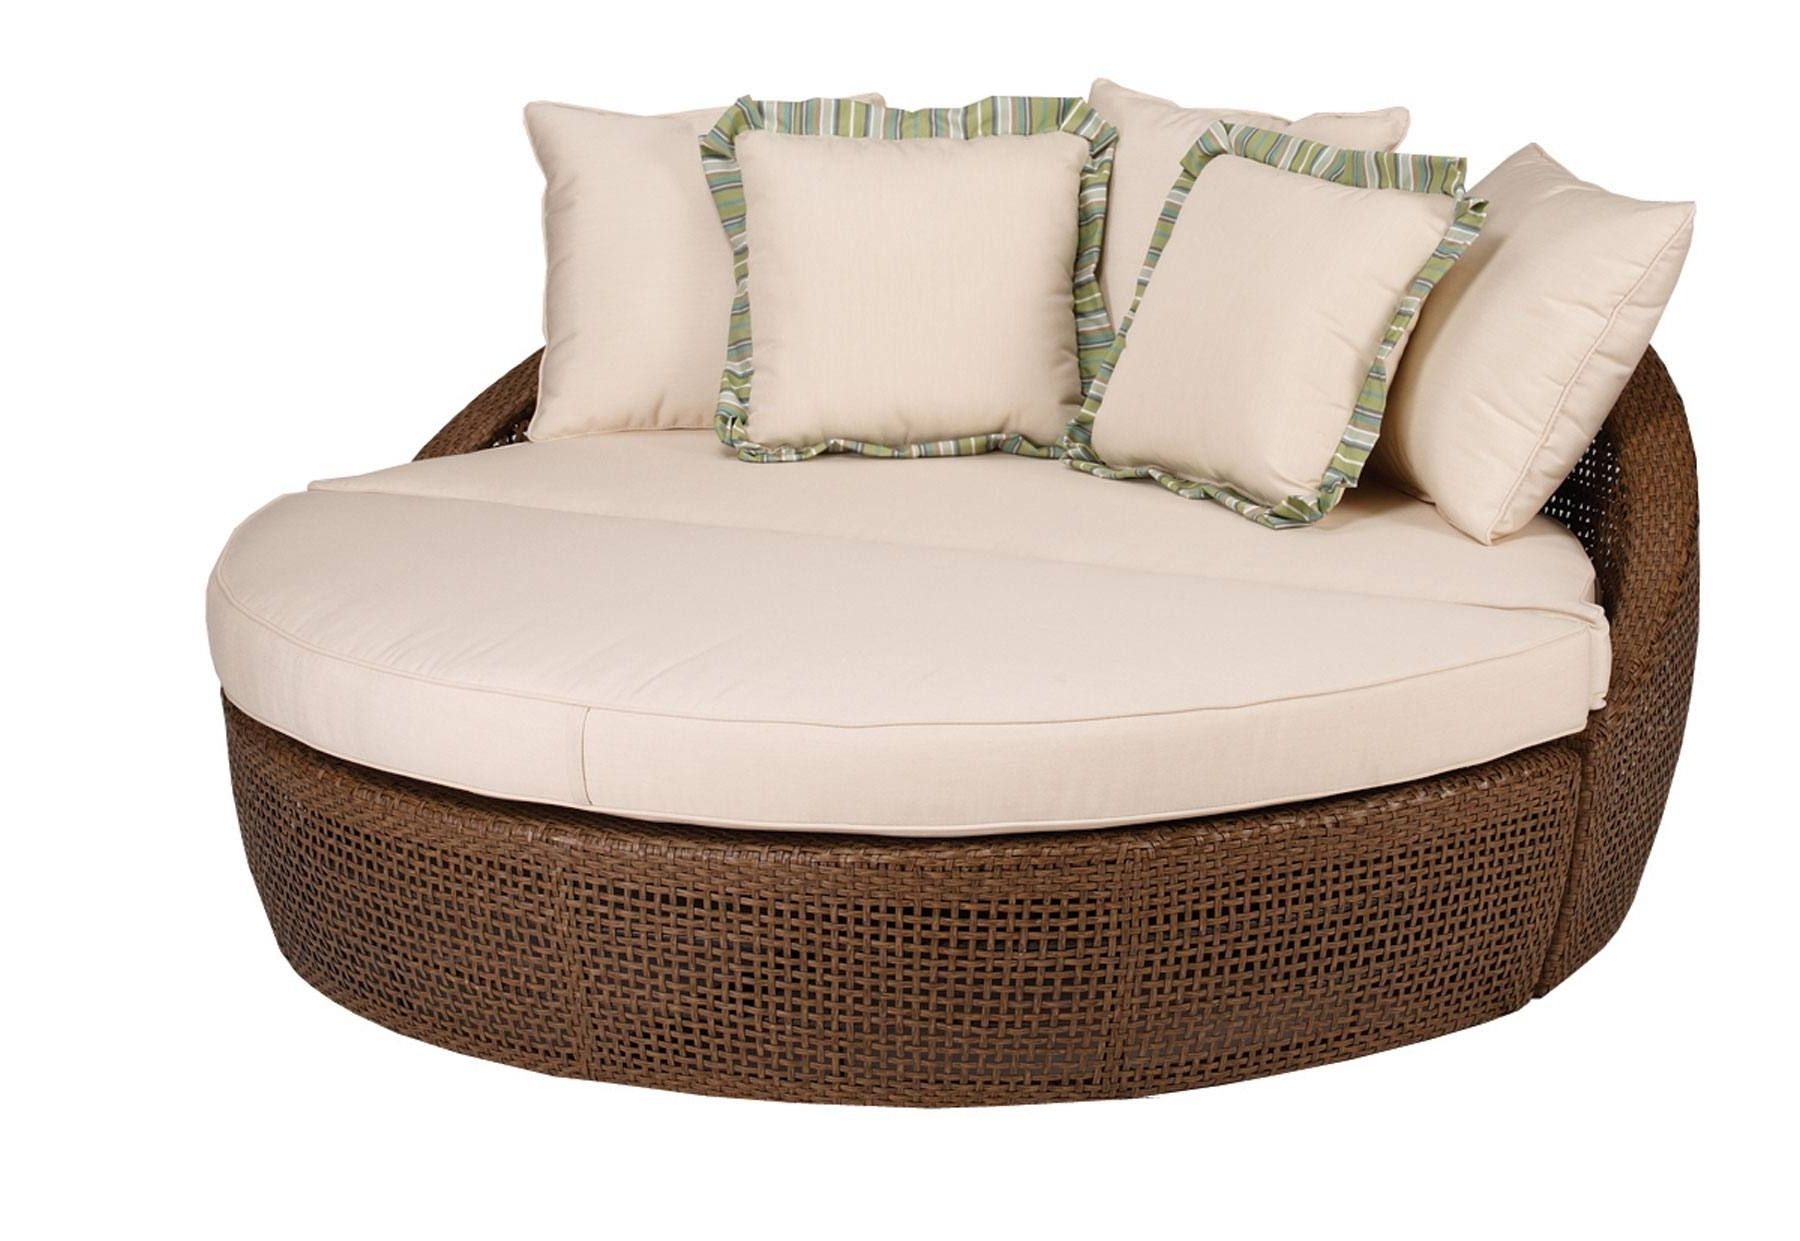 Round Chaise Lounge Chairs E280a2 Lounge Chairs Ideas With Current Round Chaise Lounges 